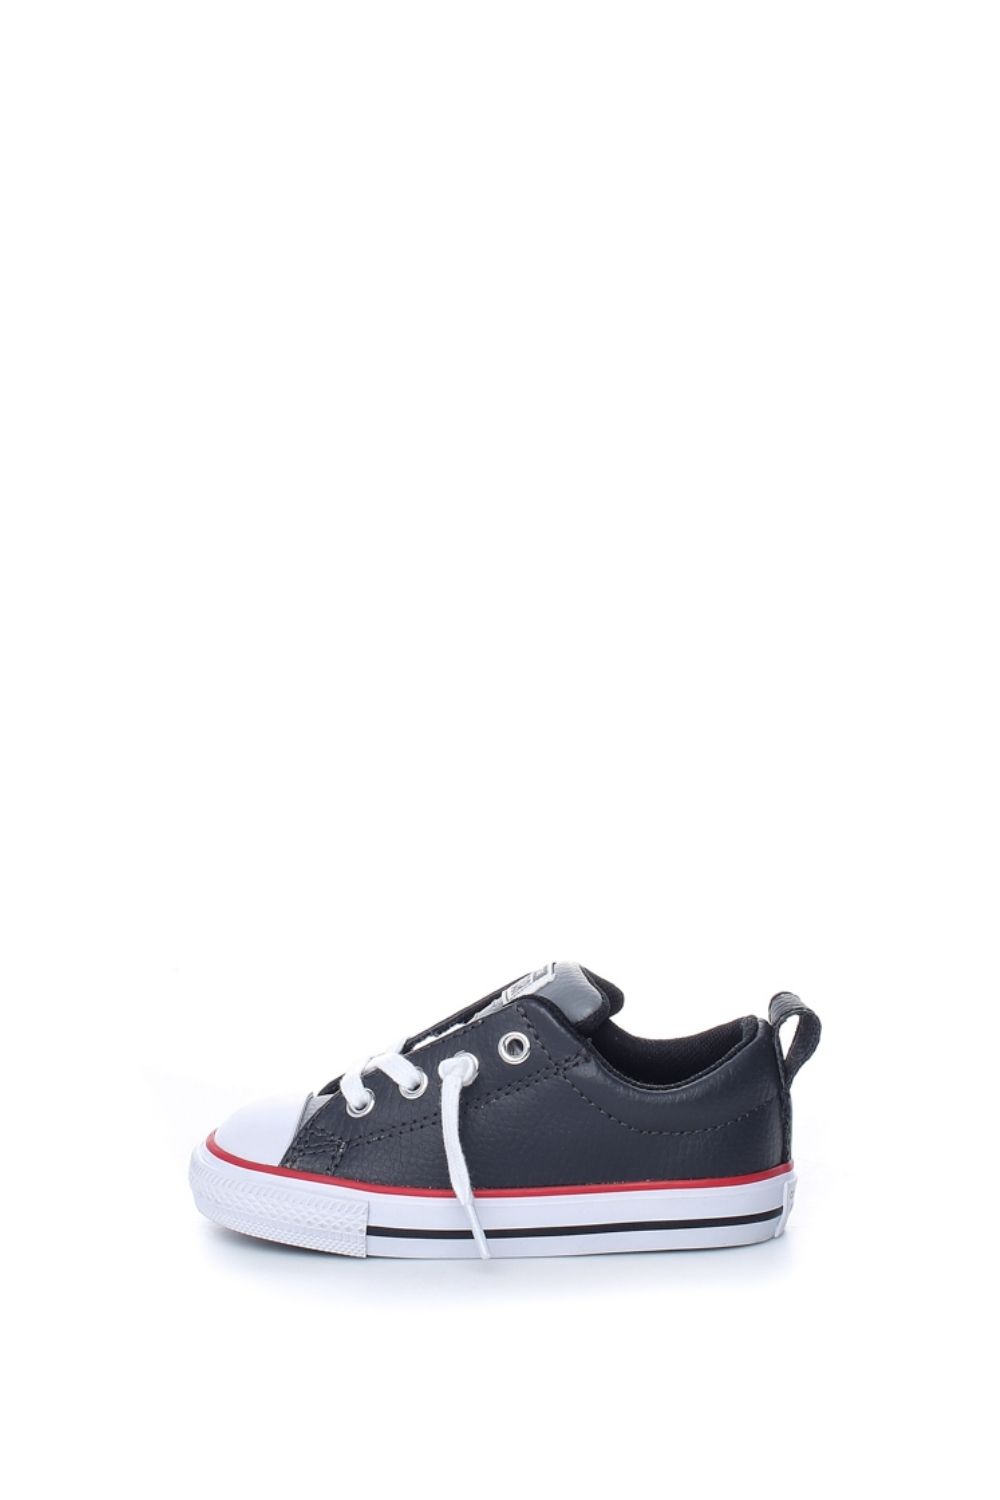 CONVERSE – Βρεφικά sneakers CONVERSE CHUCK TAYLOR ALL STAR STREET μαύρα 1649808.0-71G3